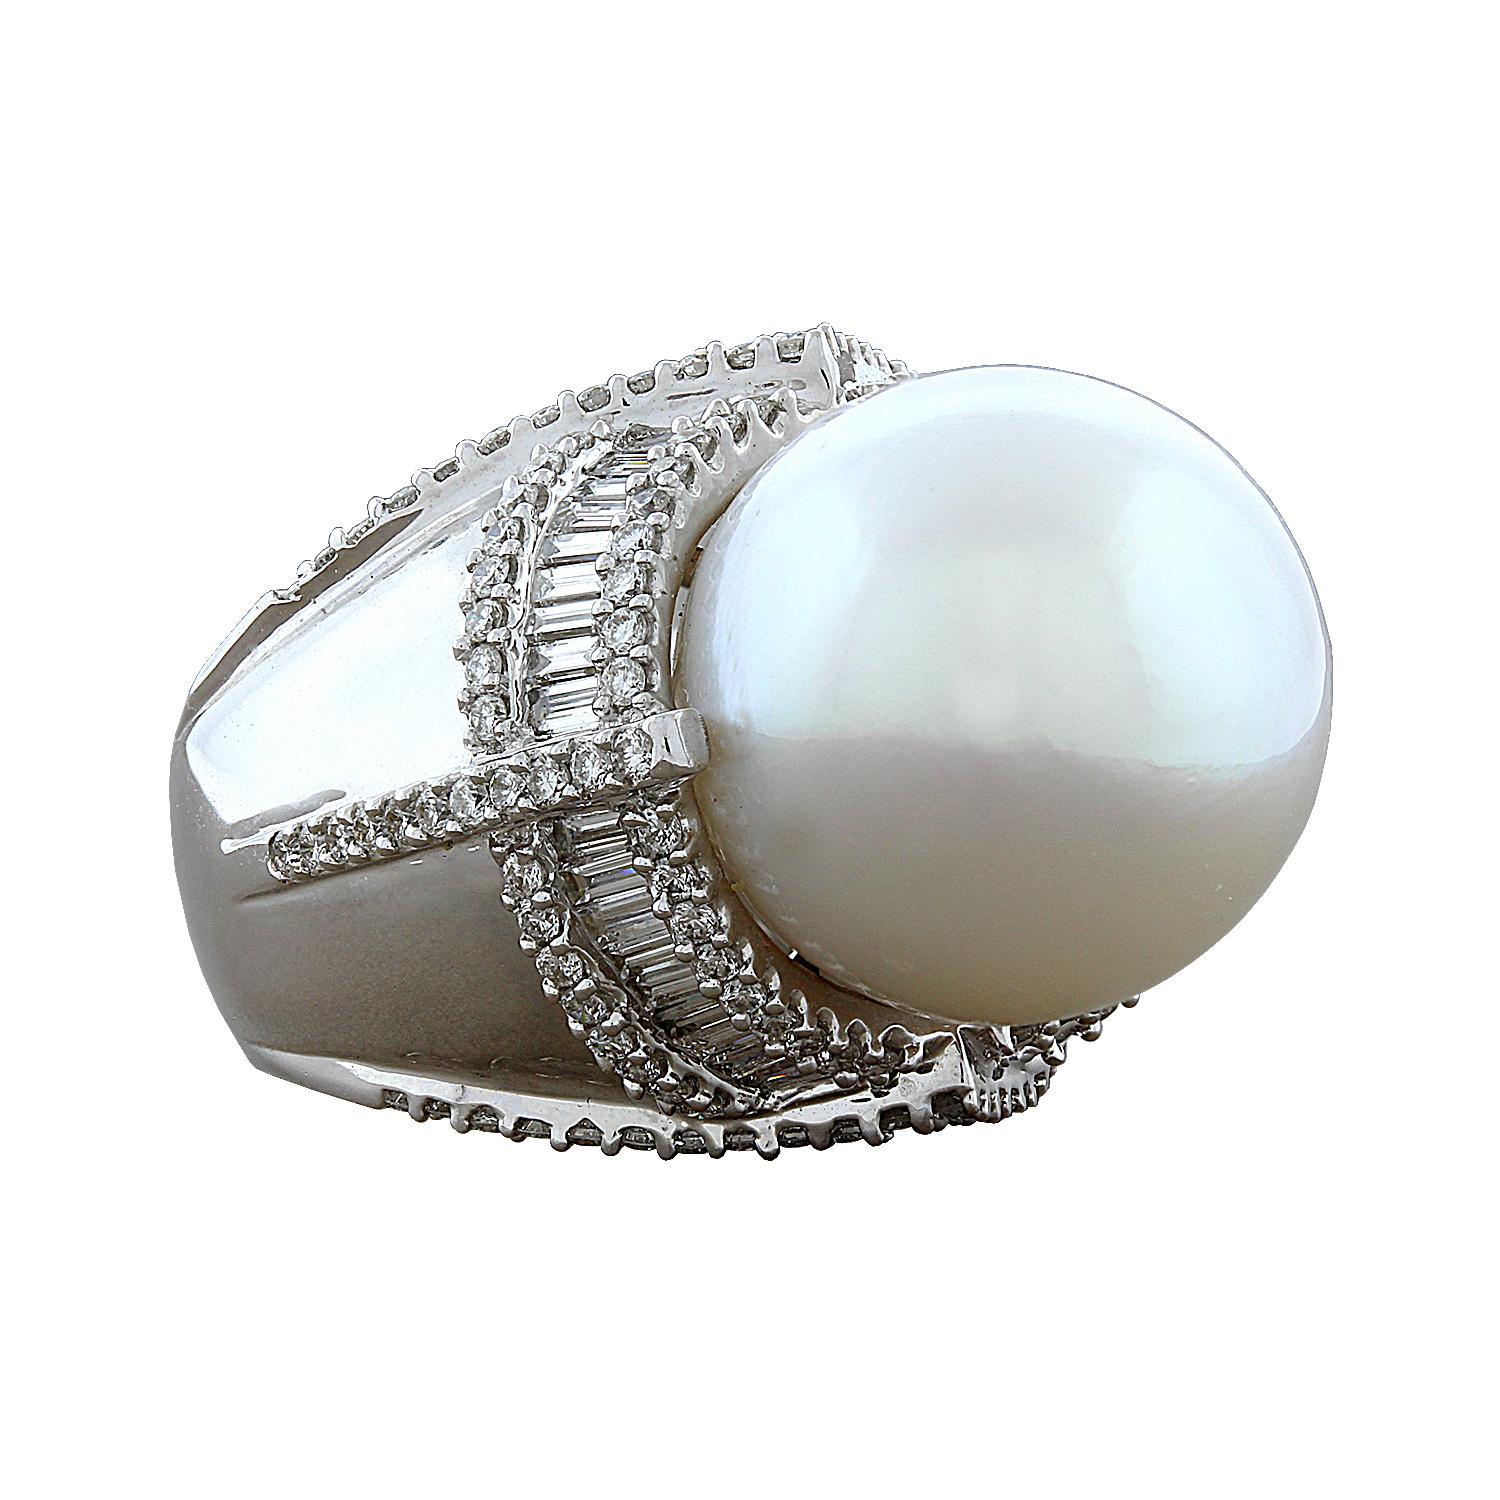 South Sea Pearl Diamond Gold Cocktail Ring For Sale